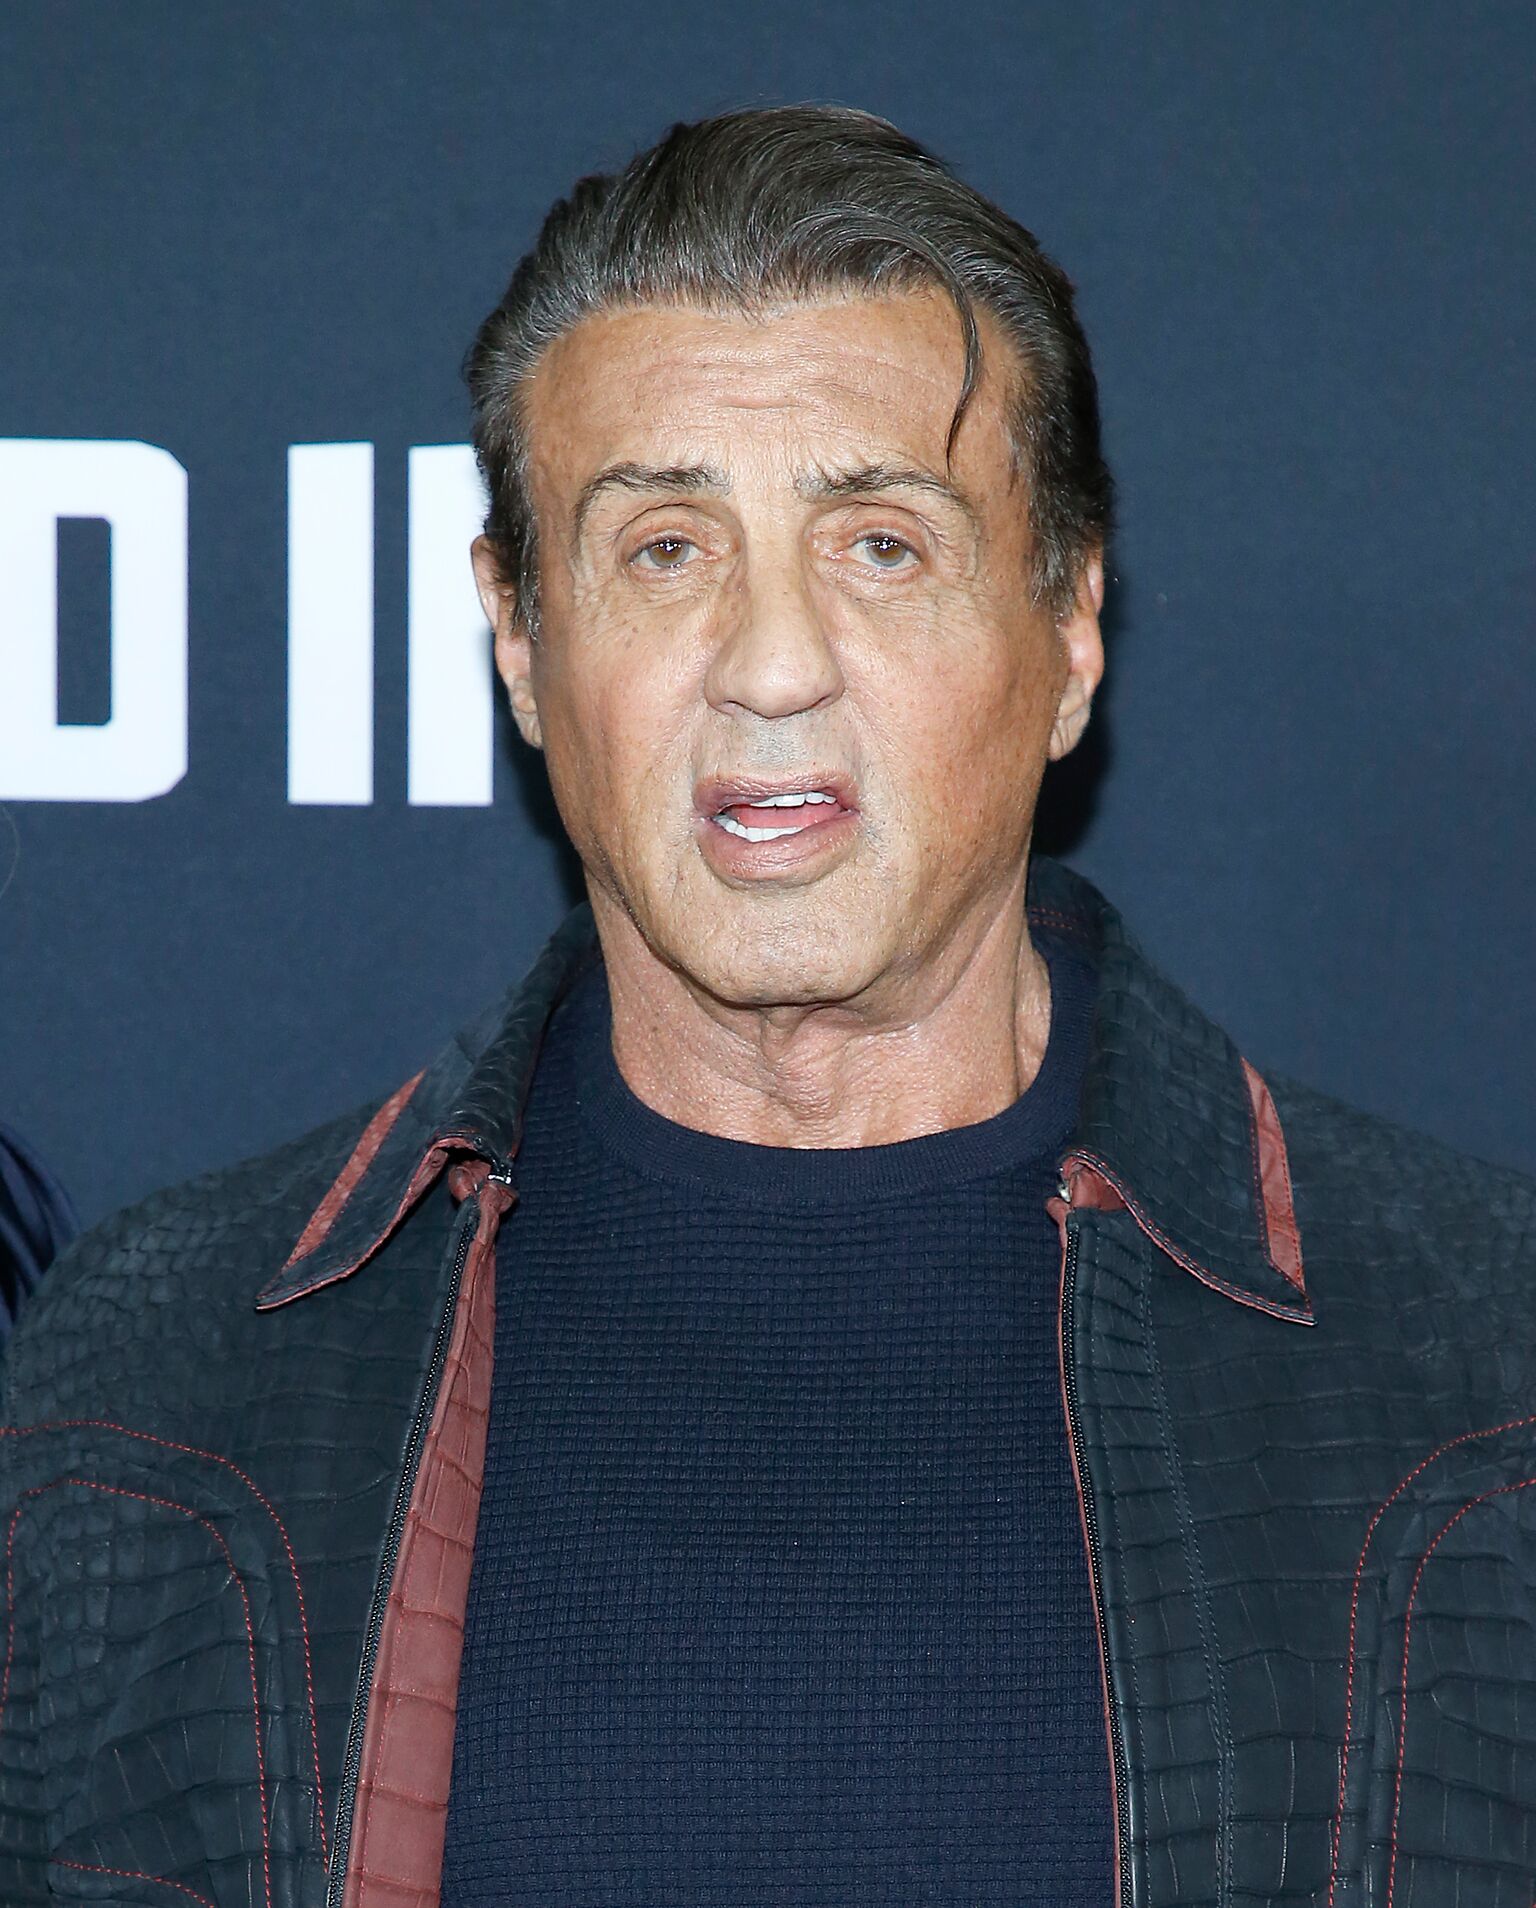 Sylvester Stallone à la projection de "Creed II" | Getty Images